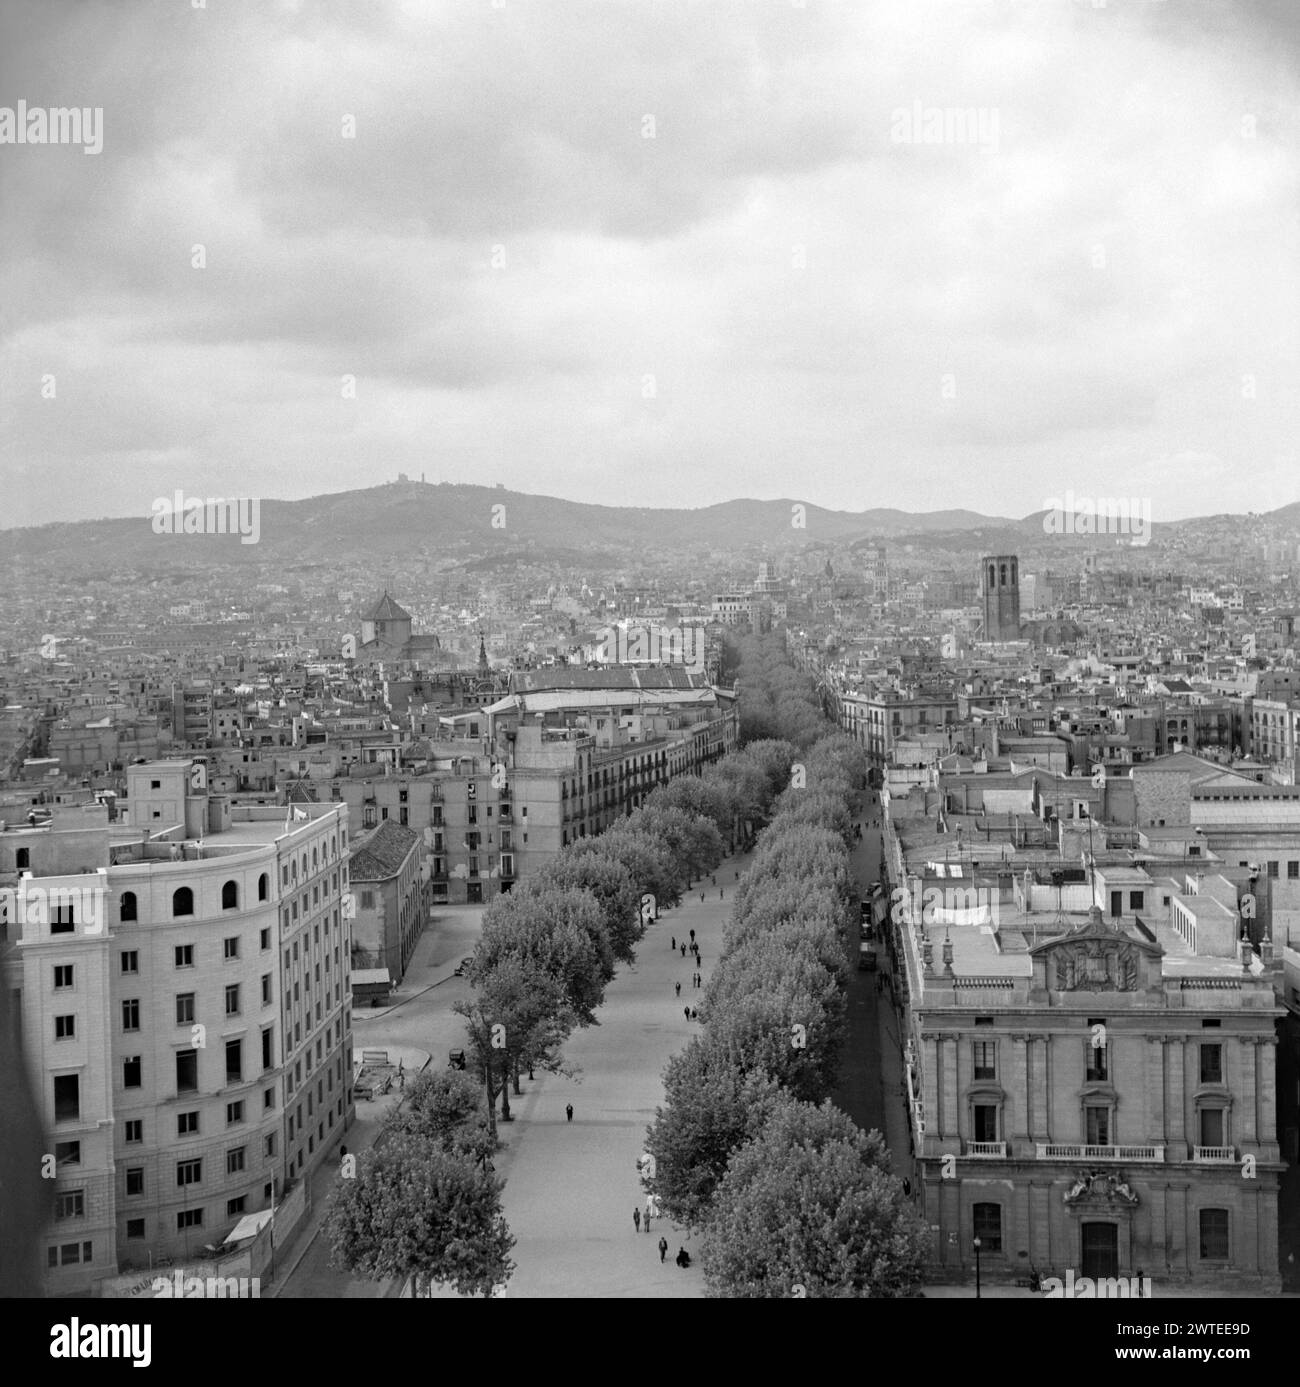 A view from the viewing gallery of Mirador de Colom, Port Vell, Barcelona, Spain in 1955. Looking northwards up Las Ramblas (La Rambla) boulevard, its impressive tree cover is the main feature. The Mirador de Colom, also known as the Columbus Monument, was built in 1888 on the occasion of the Universal Exhibition as a tribute to Christopher Columbus, who chose to disembark in the port of Barcelona on his return from America – a vintage 1950s photograph. Stock Photo